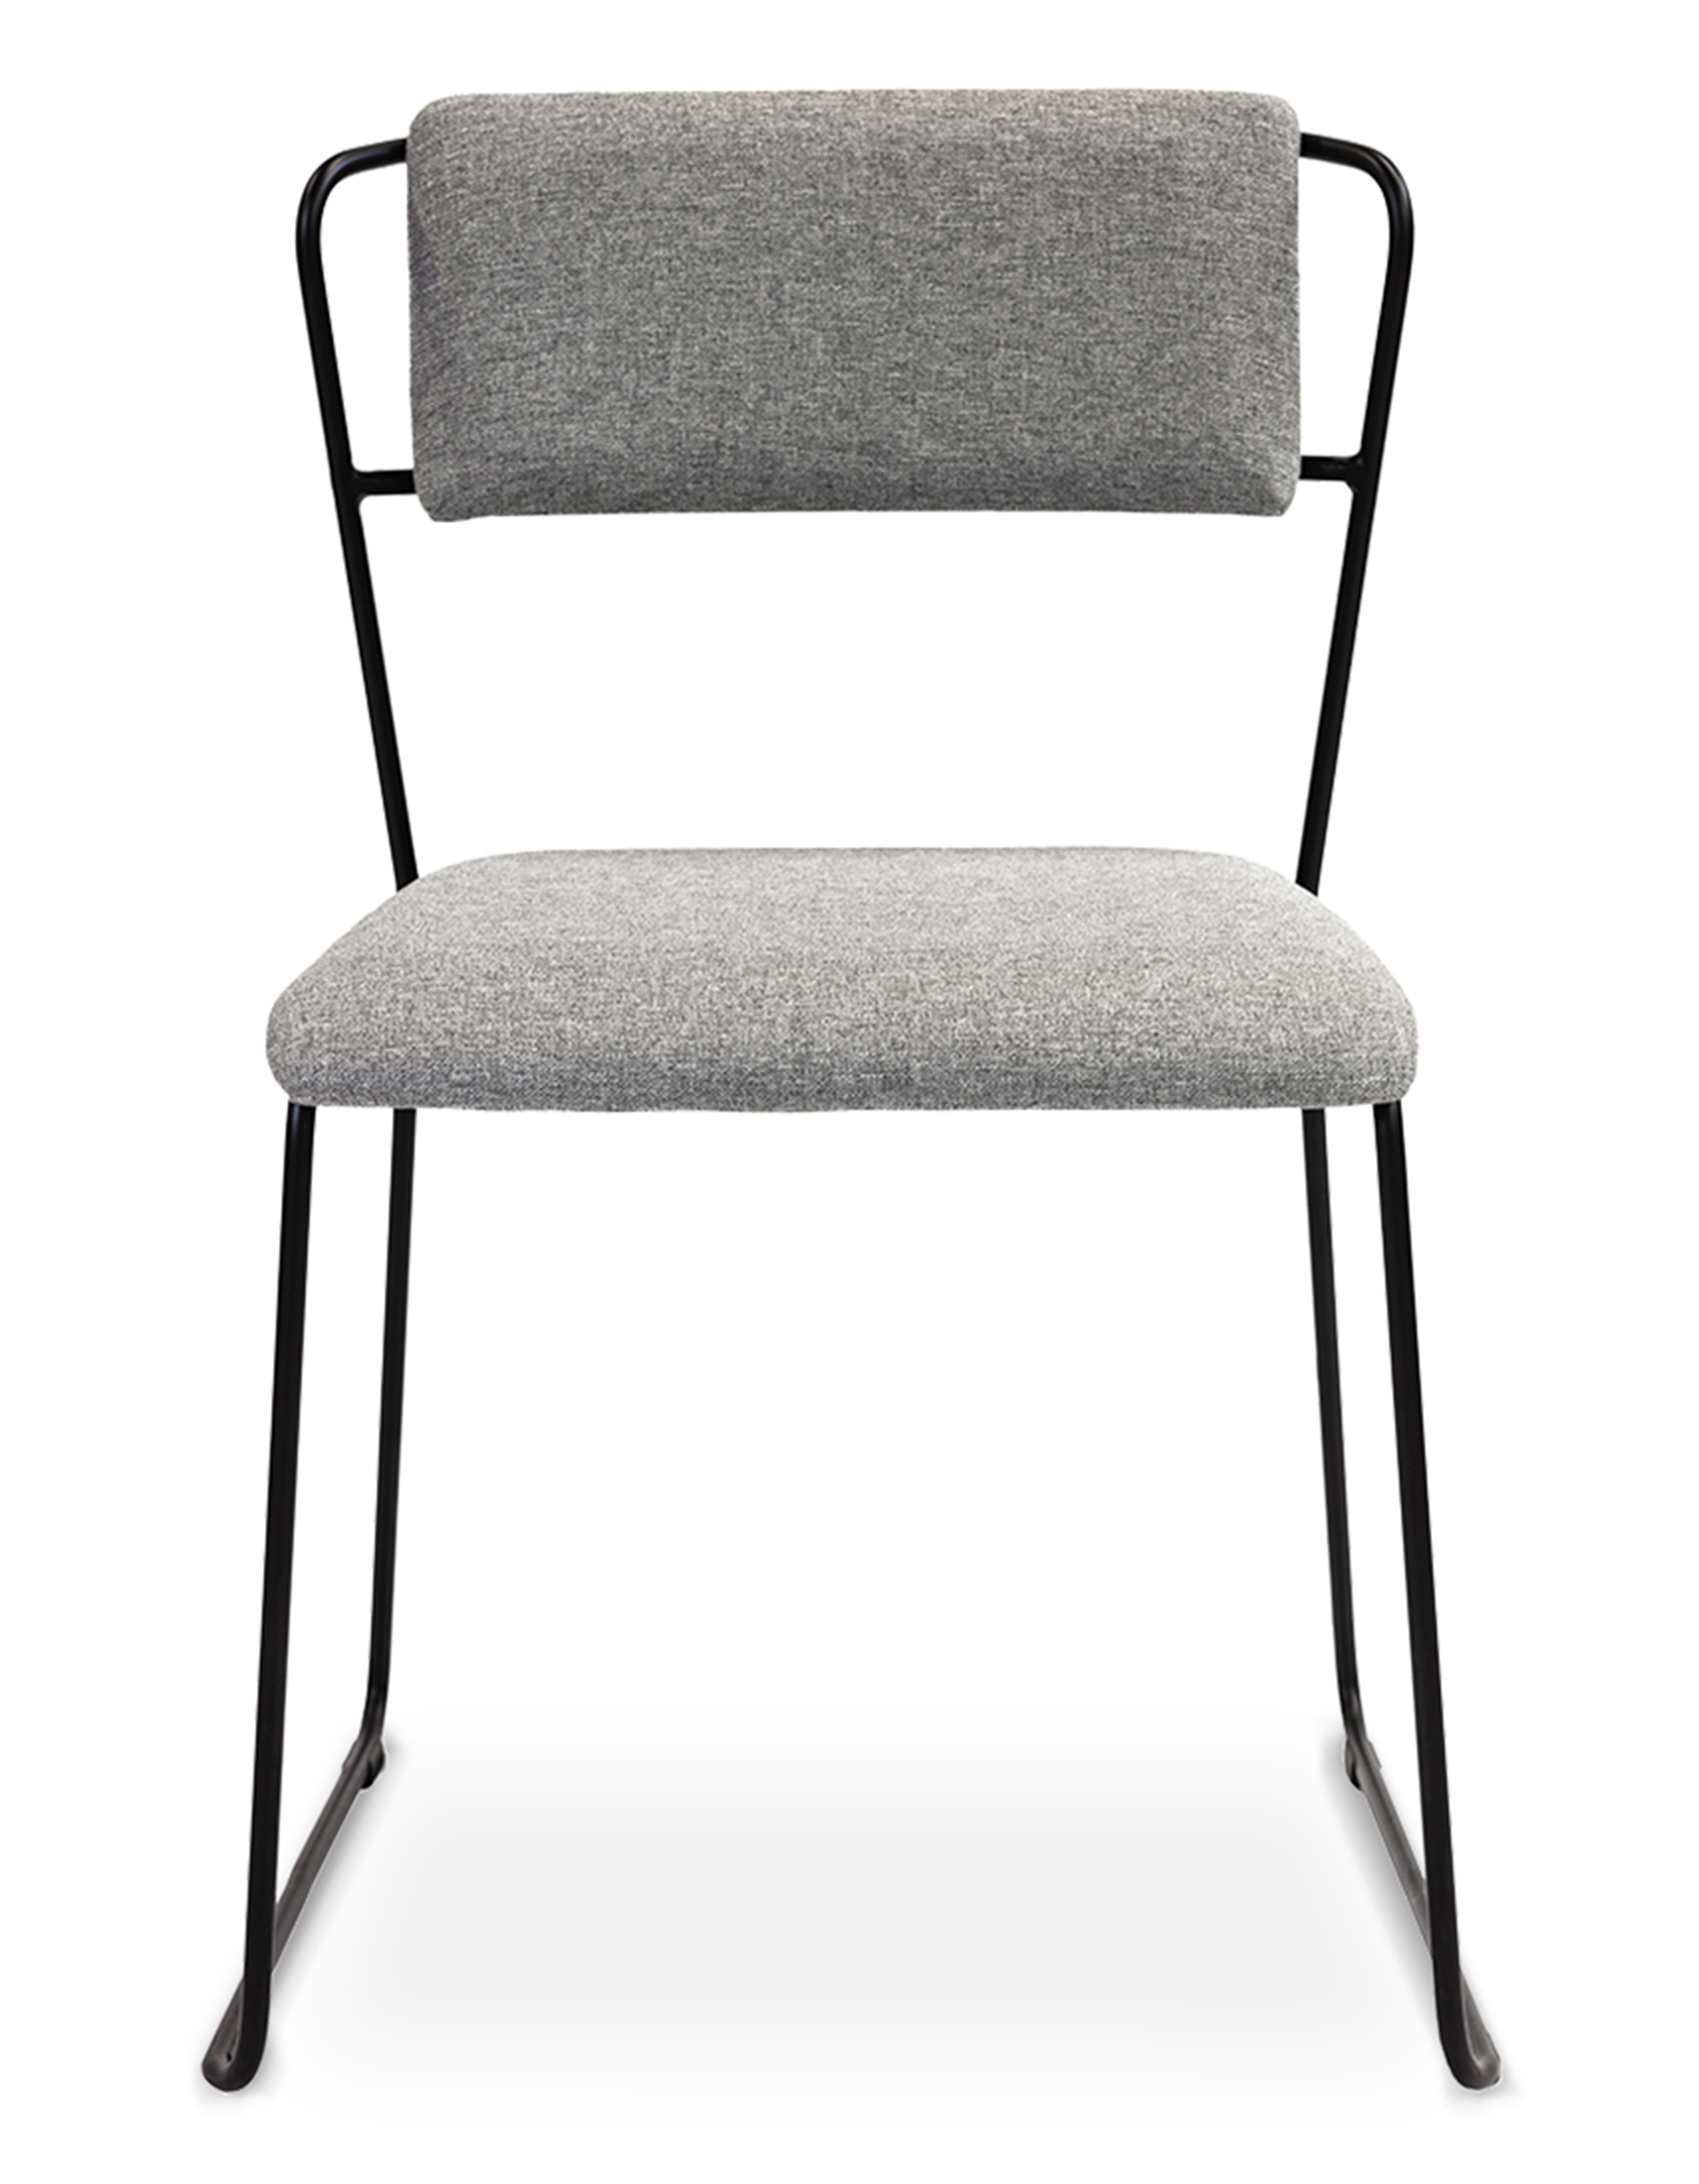 WS - Transit chair - Full Upholstery (Front)